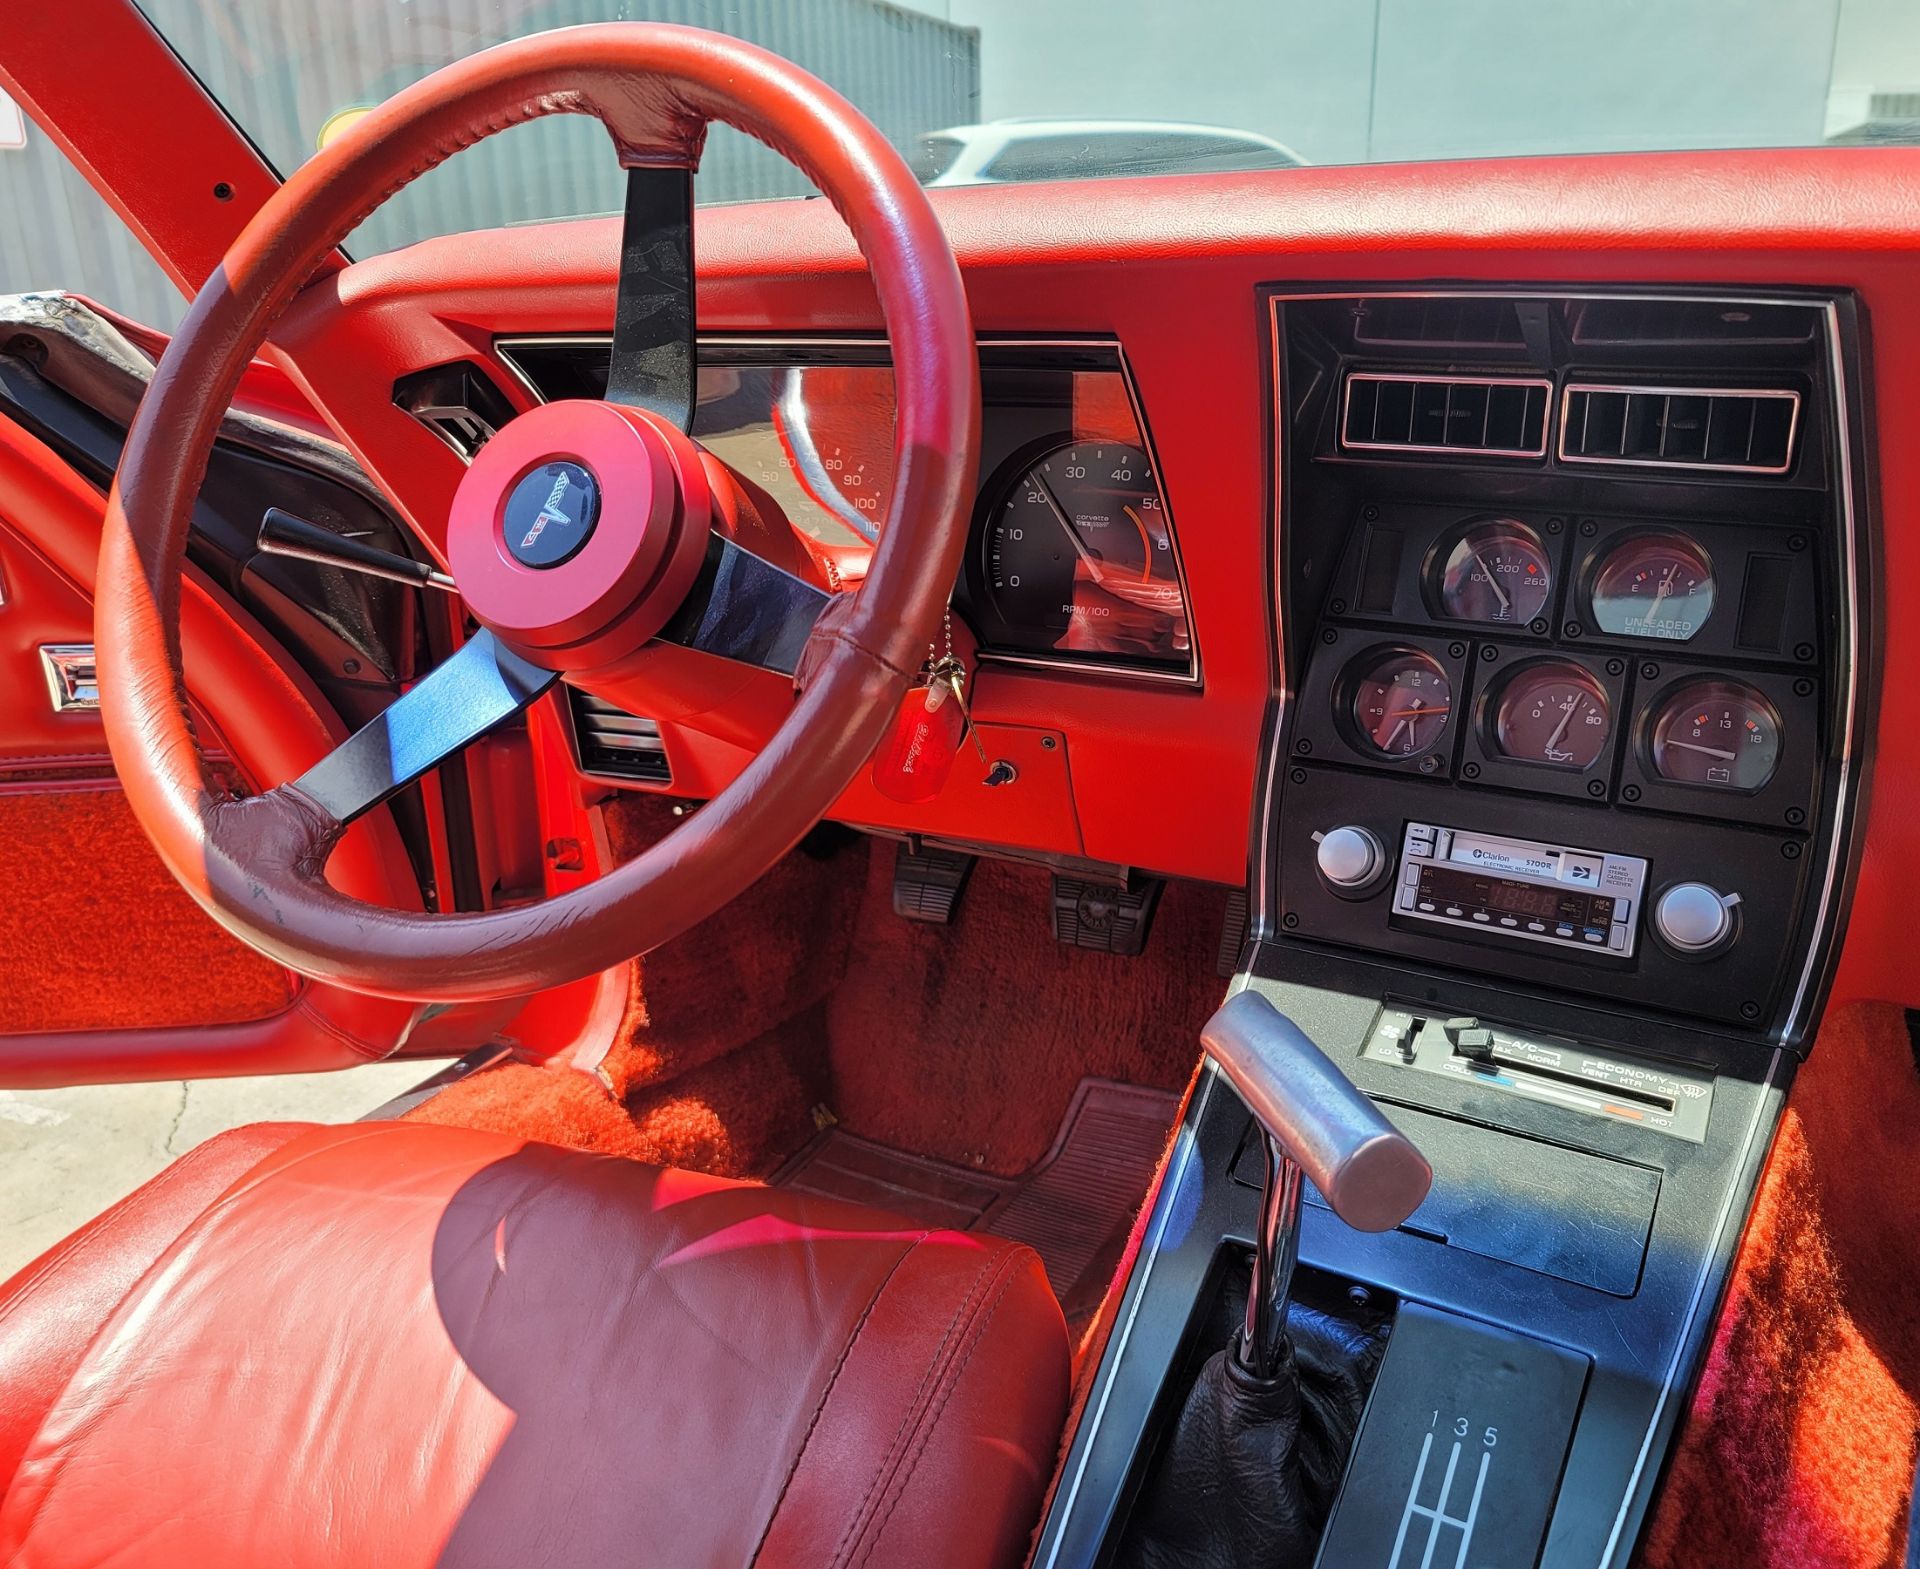 1980 CHEVROLET CORVETTE, WAS VIC EDELBROCK'S PERSONAL CAR BOUGHT FOR R&D, RED INTERIOR, TITLE ONLY. - Image 20 of 70